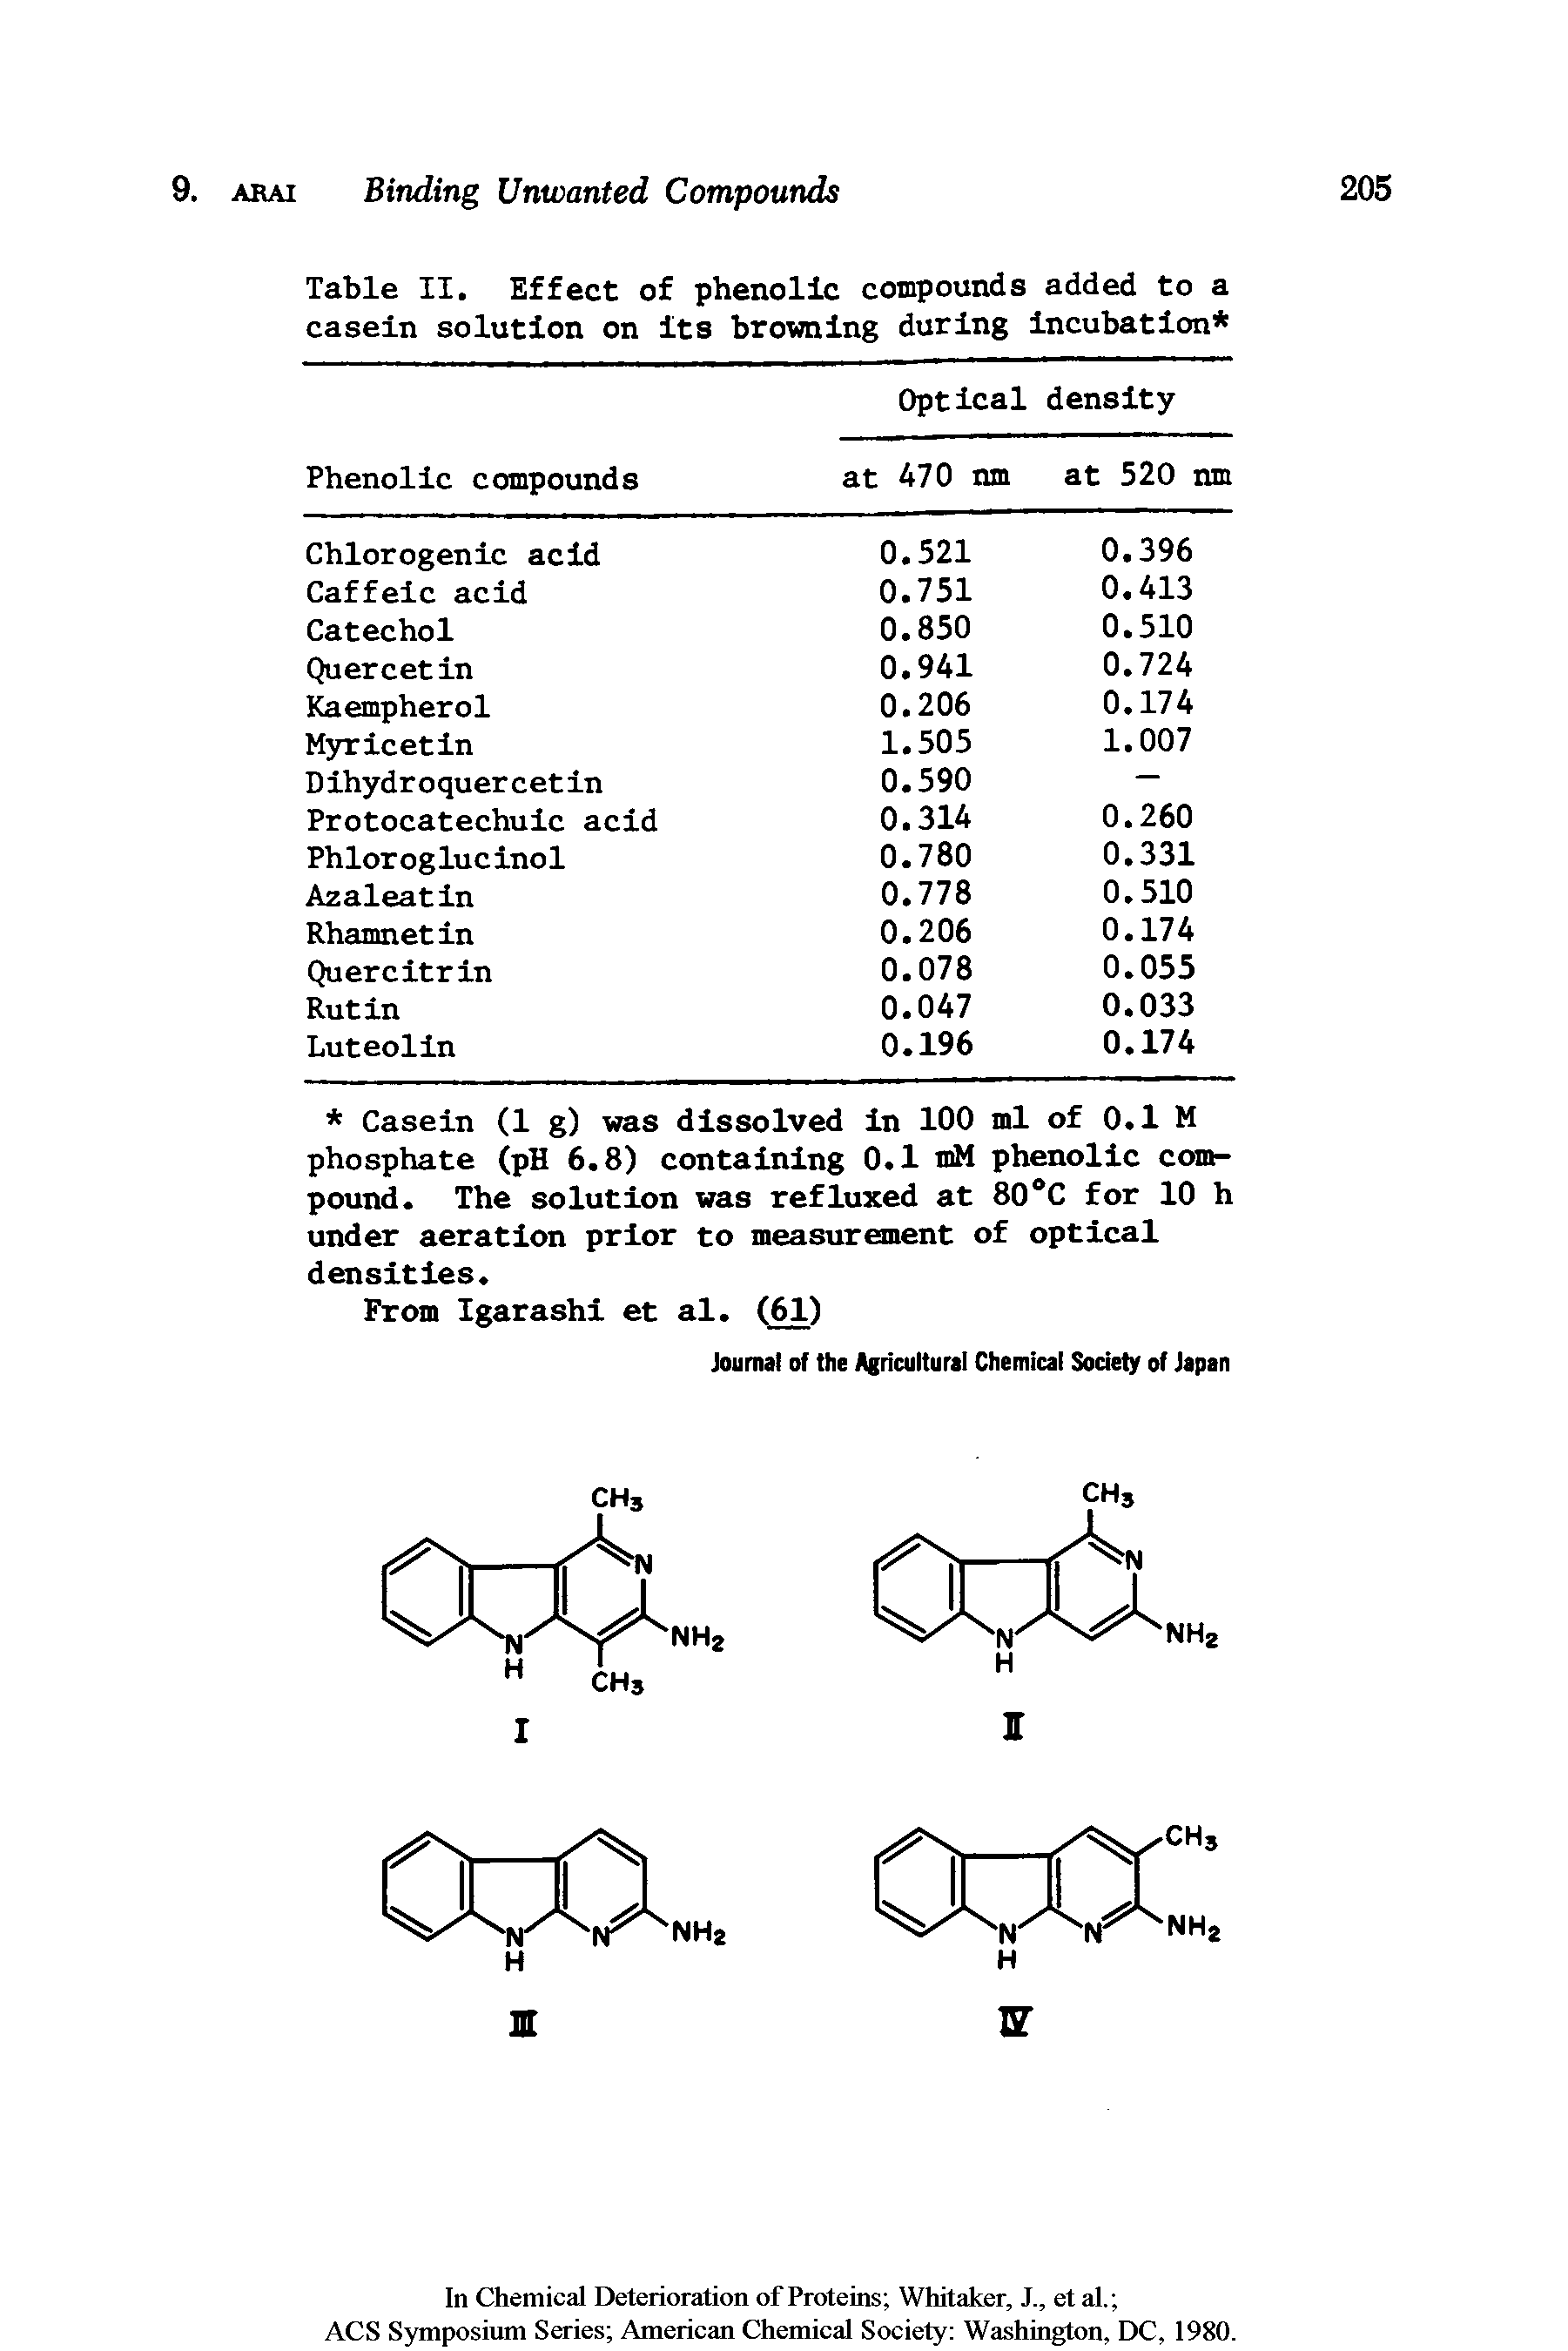 Table II. Effect of phenolic compounds added to a casein solution on its browning during incubation ...